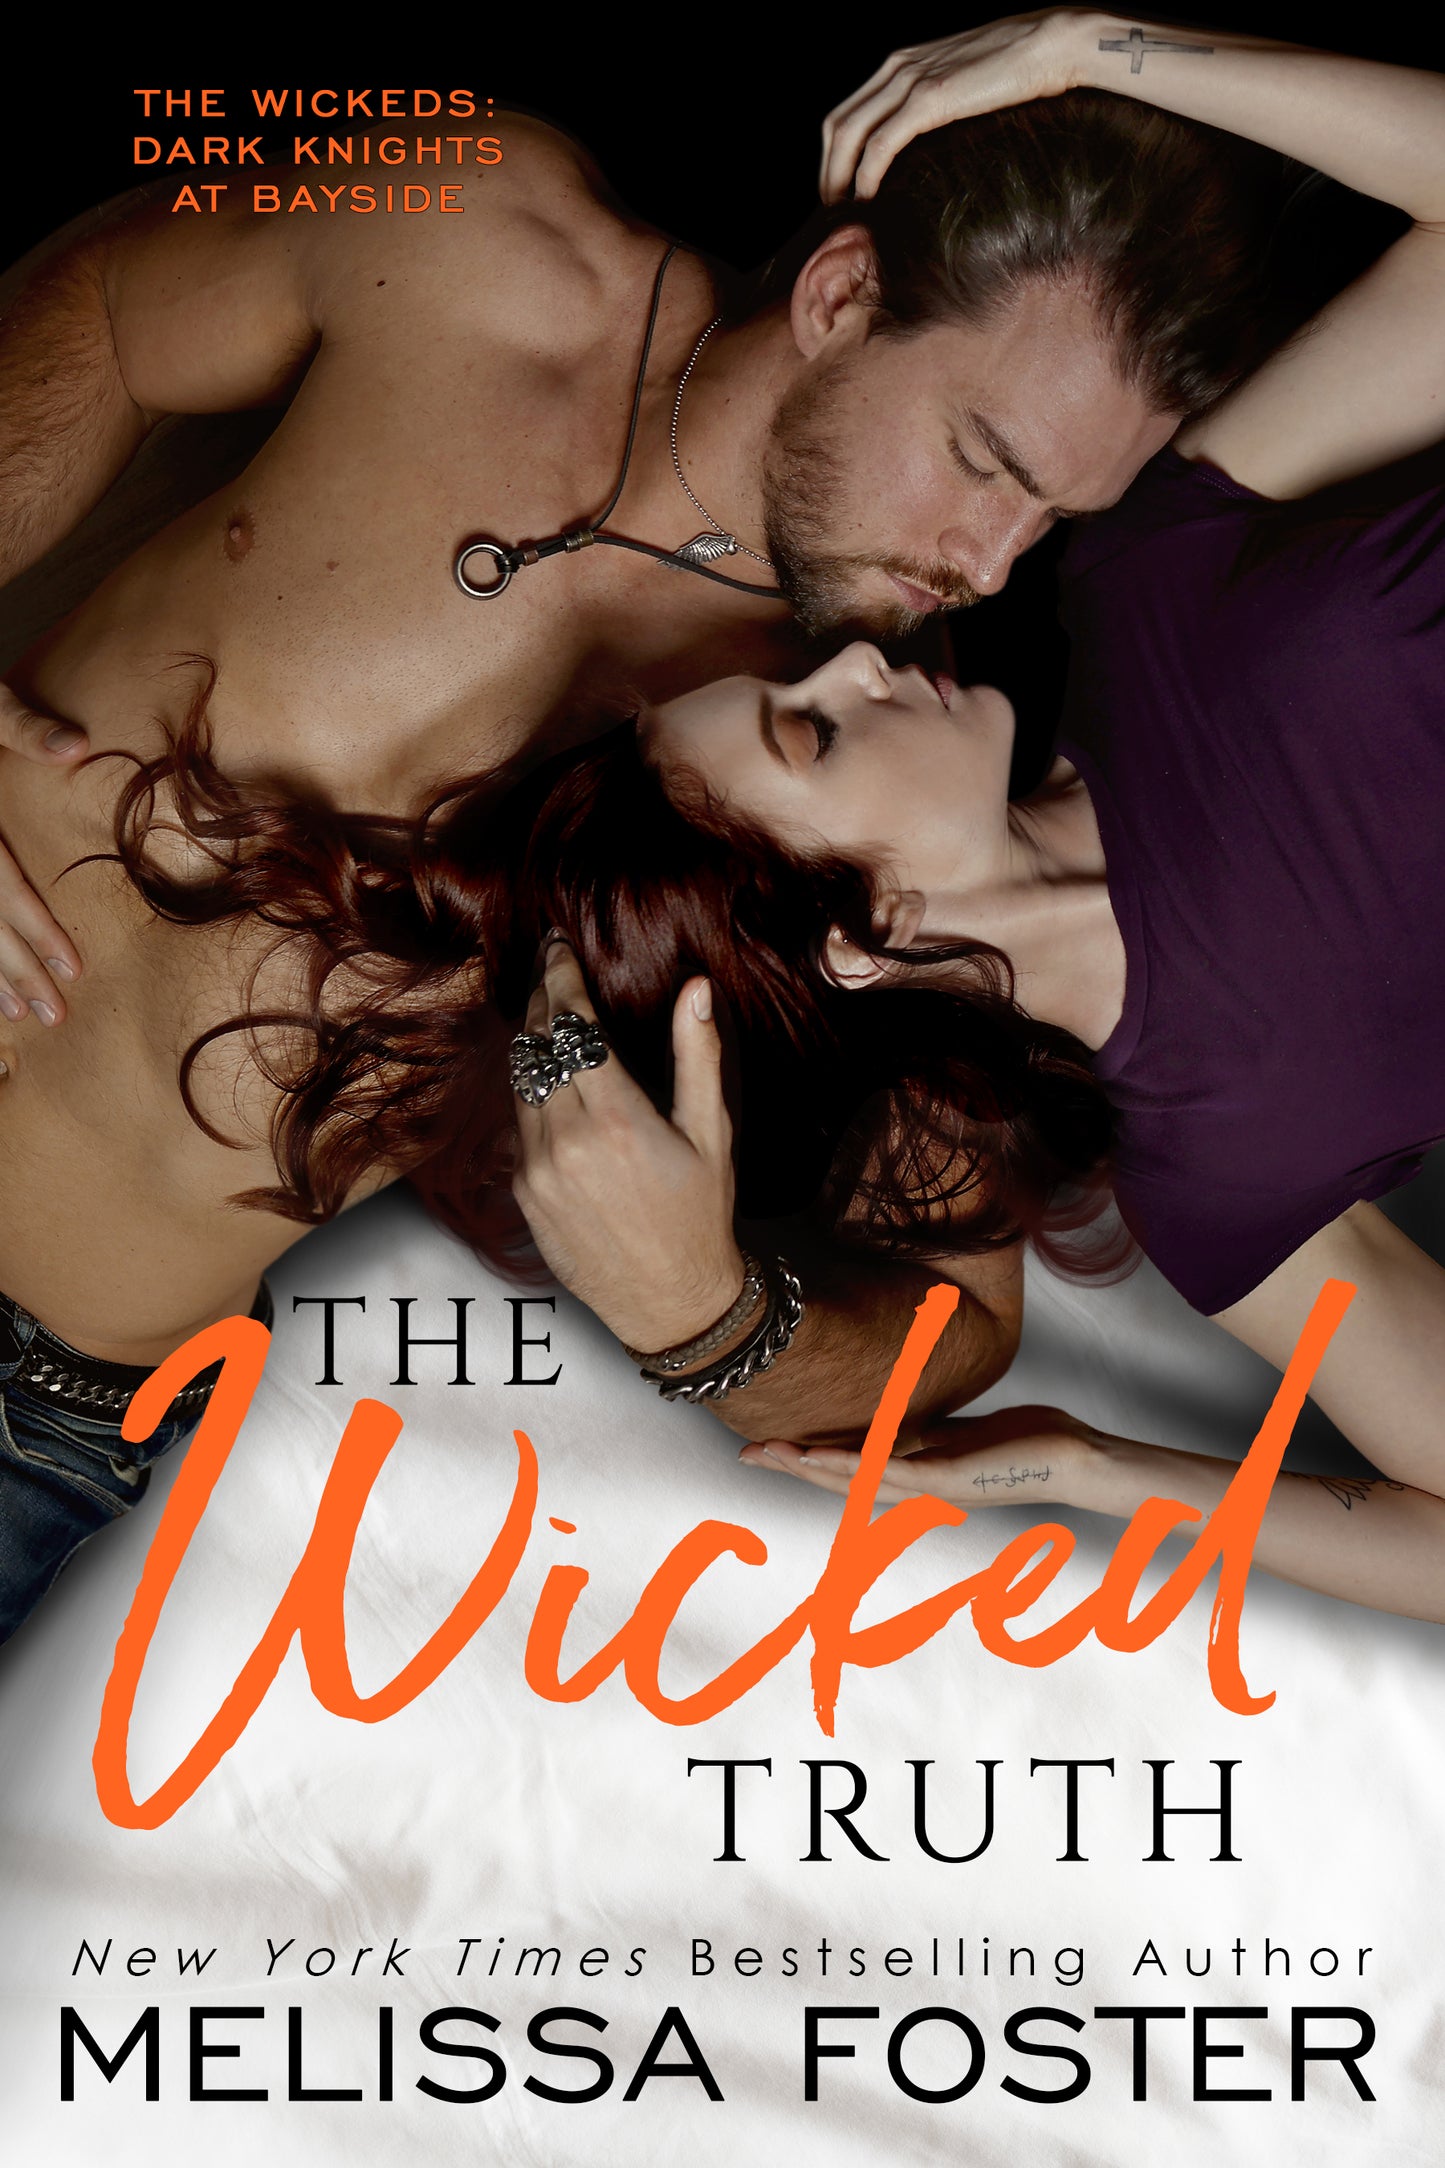 The Wicked Truth - Melissa Foster